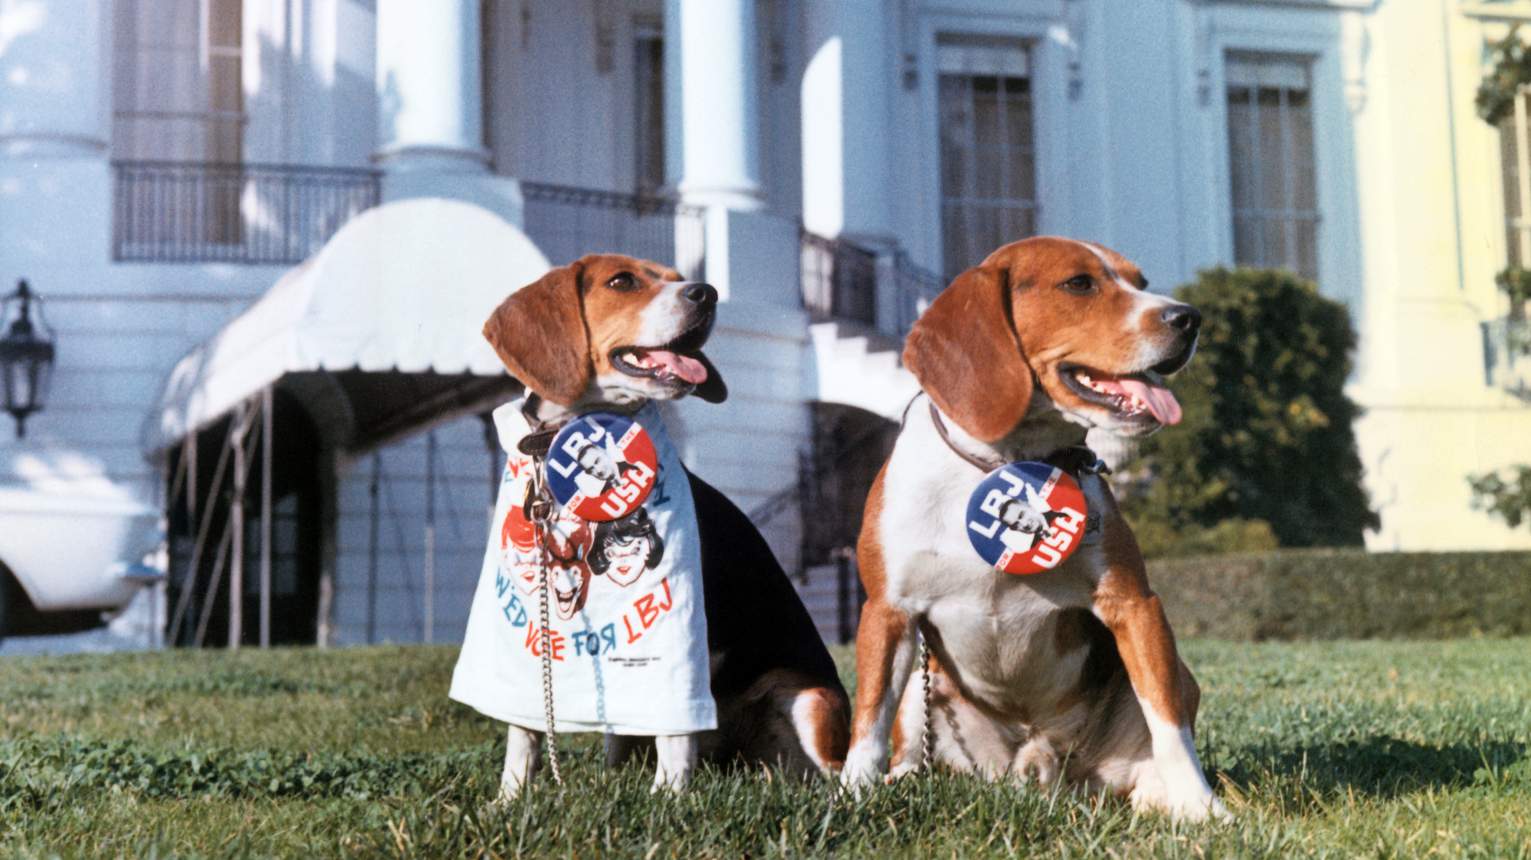 Campaign pups throughout the years: These 11 photos will make you crack a smile